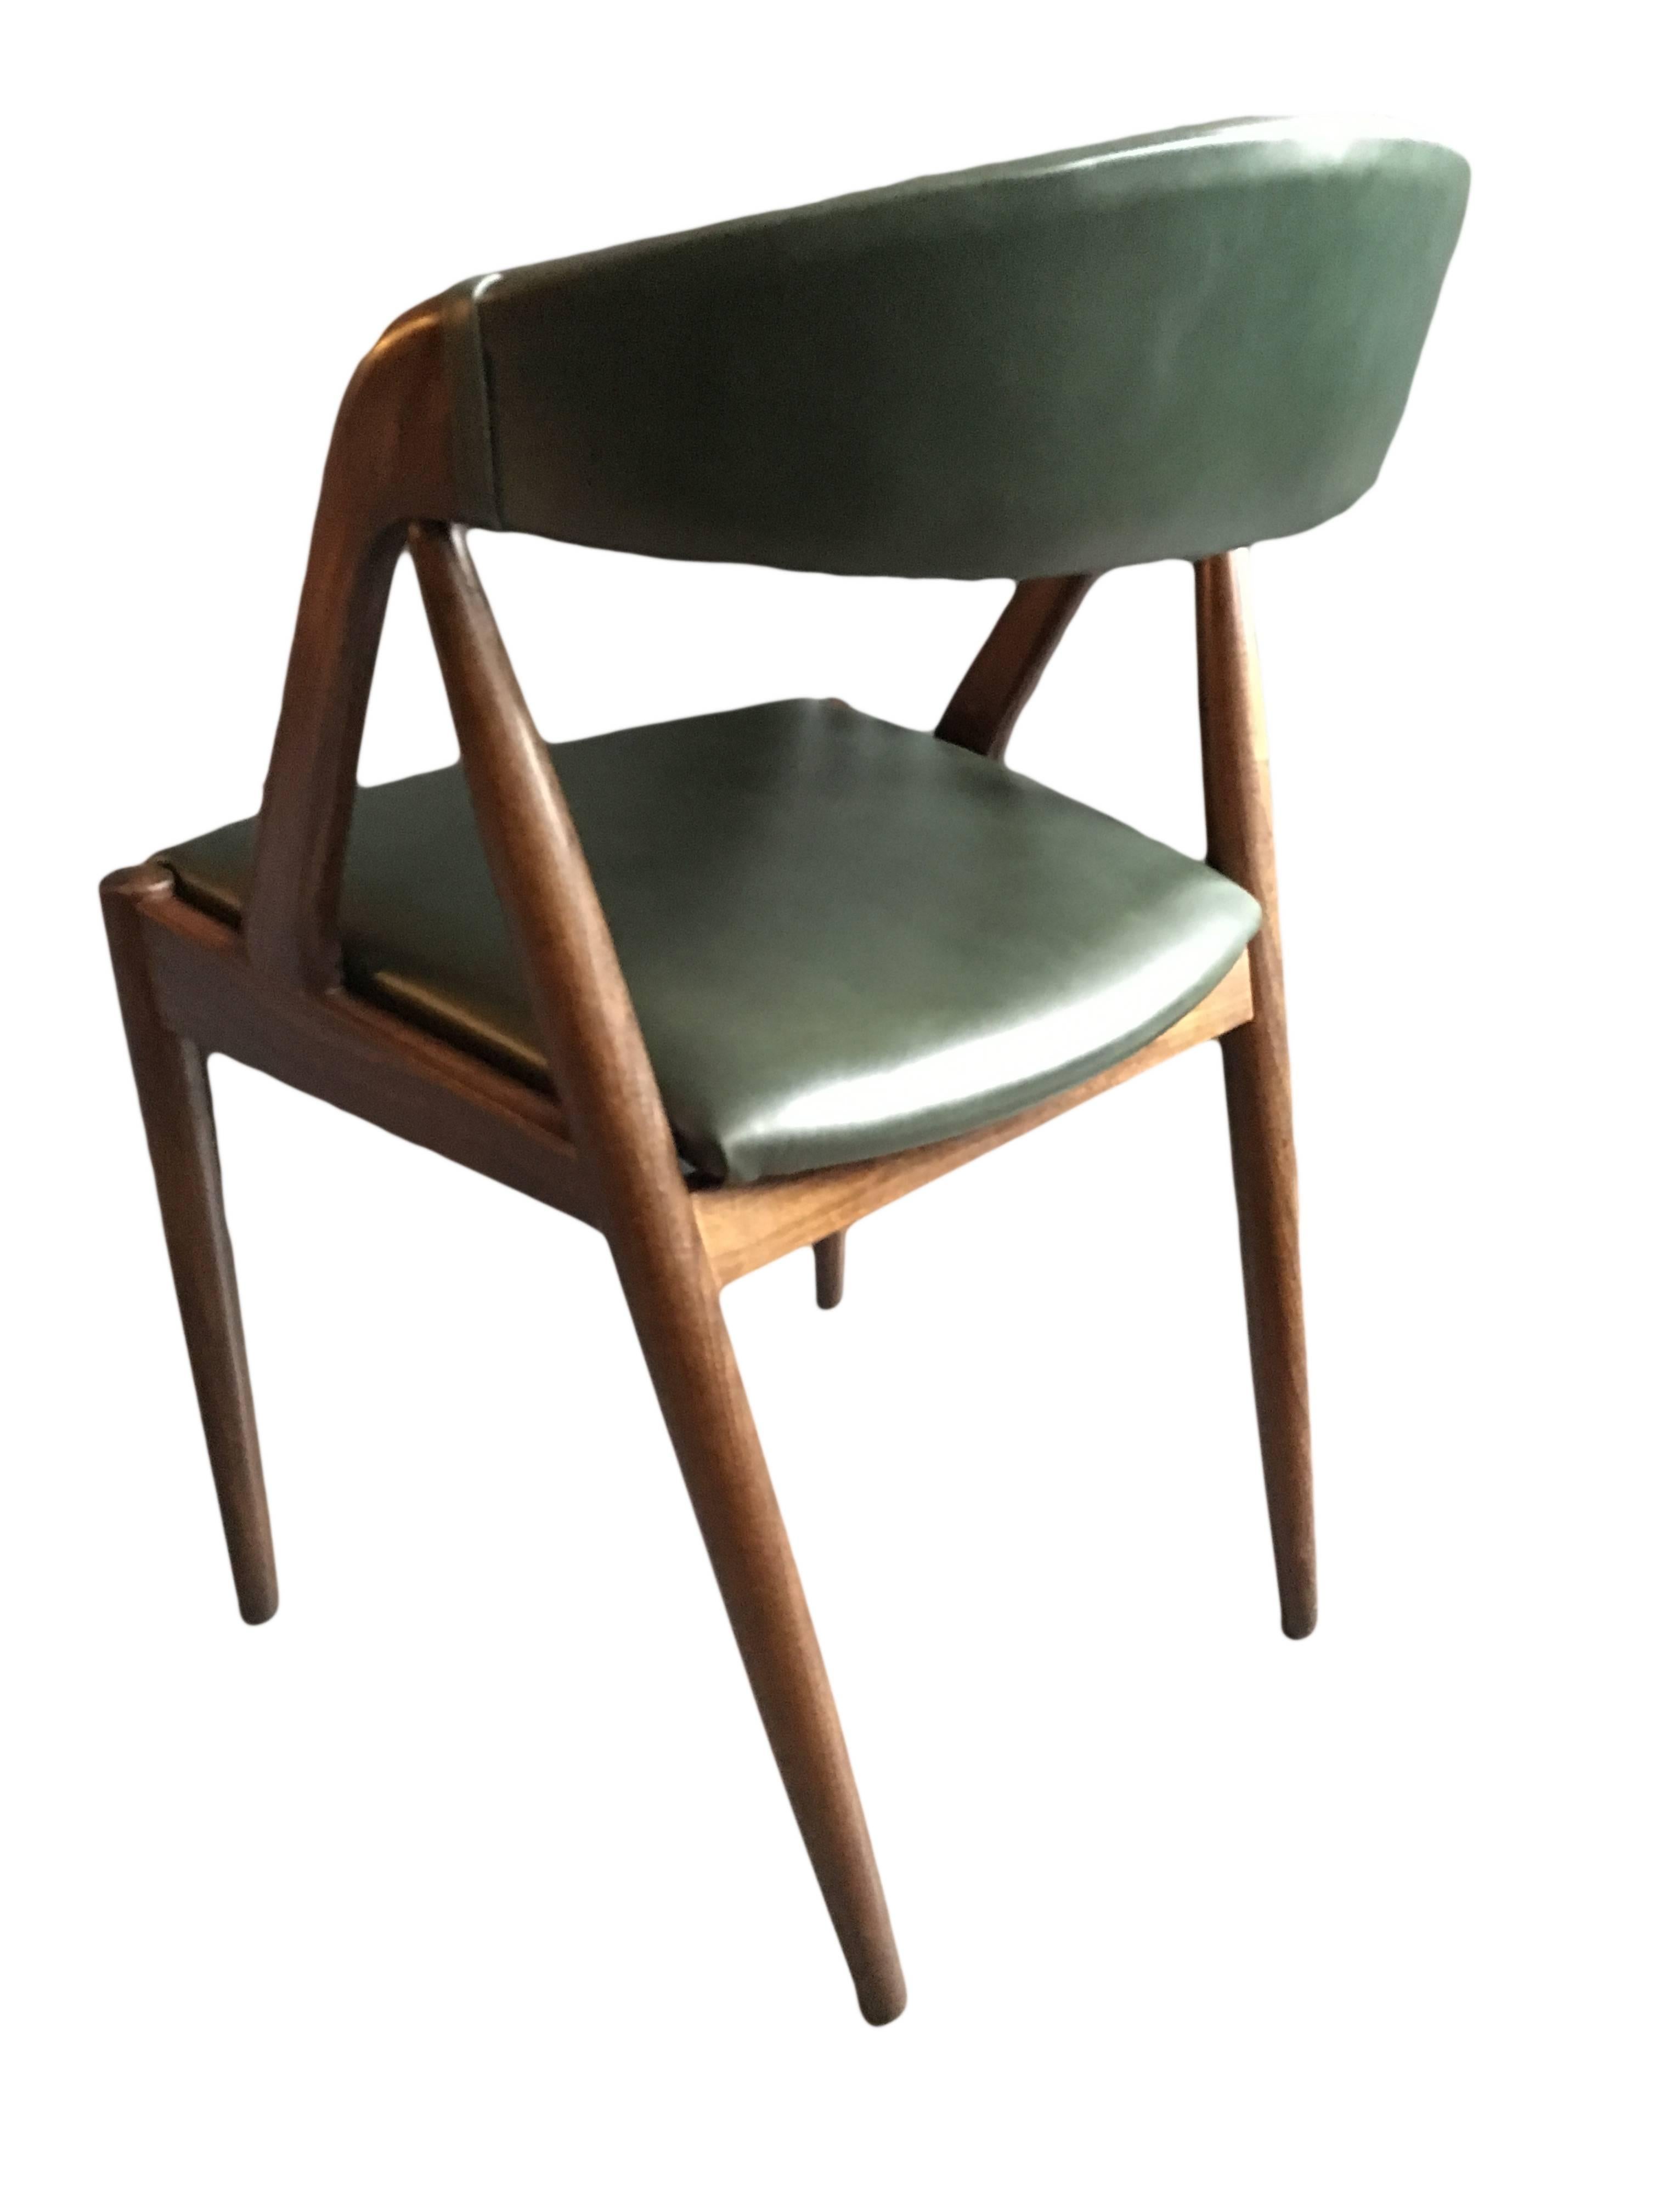 Set of six model 31 dining chairs by Kai Kristiansen. Fully re-polished and reupholstered in dark green Italian leather. Dark teak frames. Produced in Denmark, circa 1960.